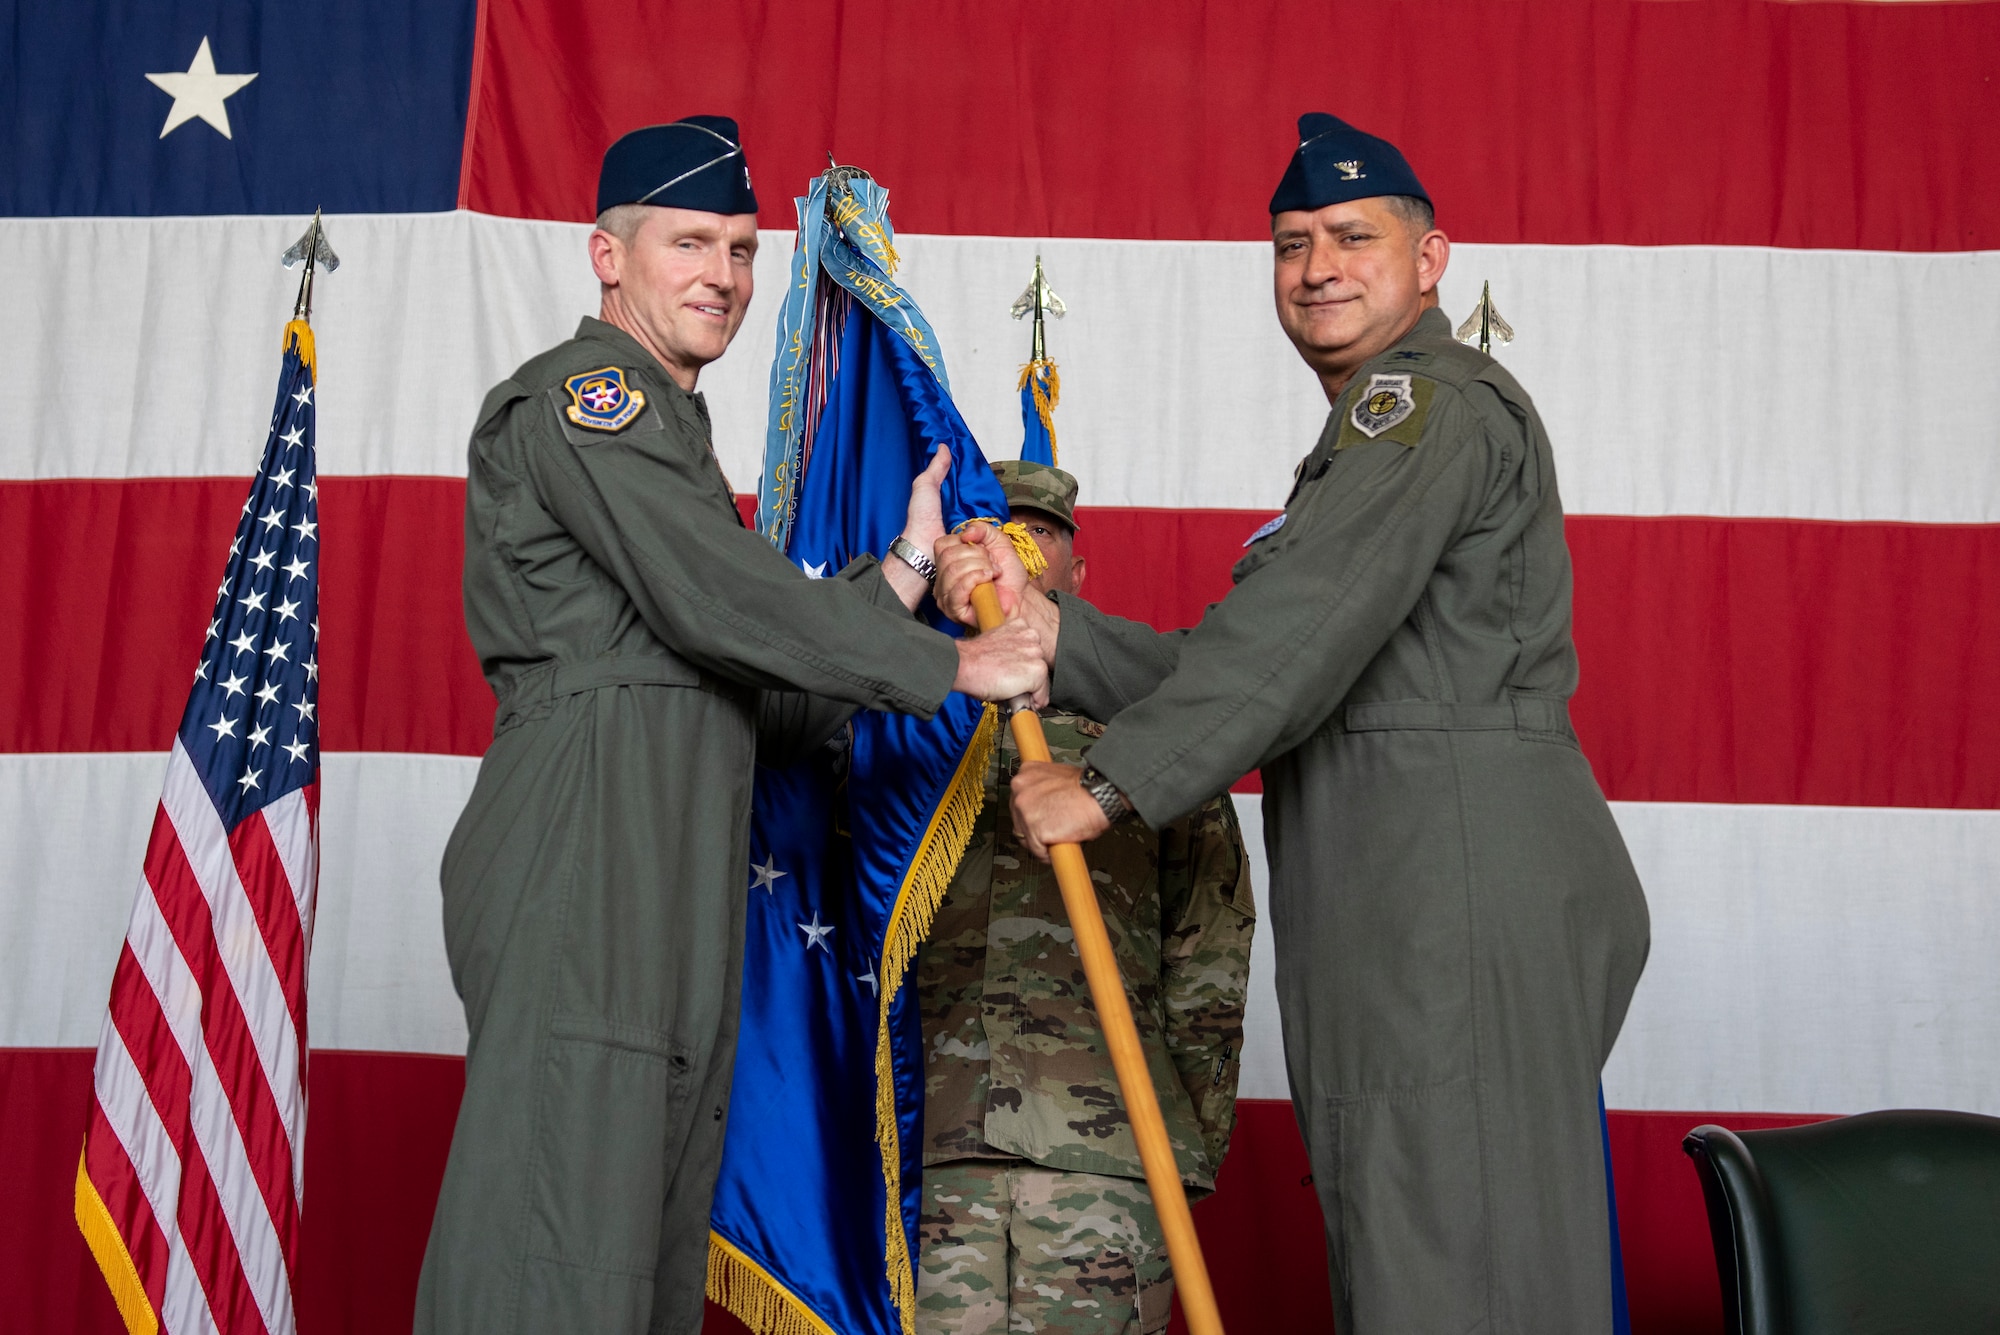 51st Fighter Wing held a change of command ceremony at Osan Air Base, Republic of Korea, June 25, 2021. Col. John Gonzales transferred command of the 51st FW to Col. Joshua Wood.